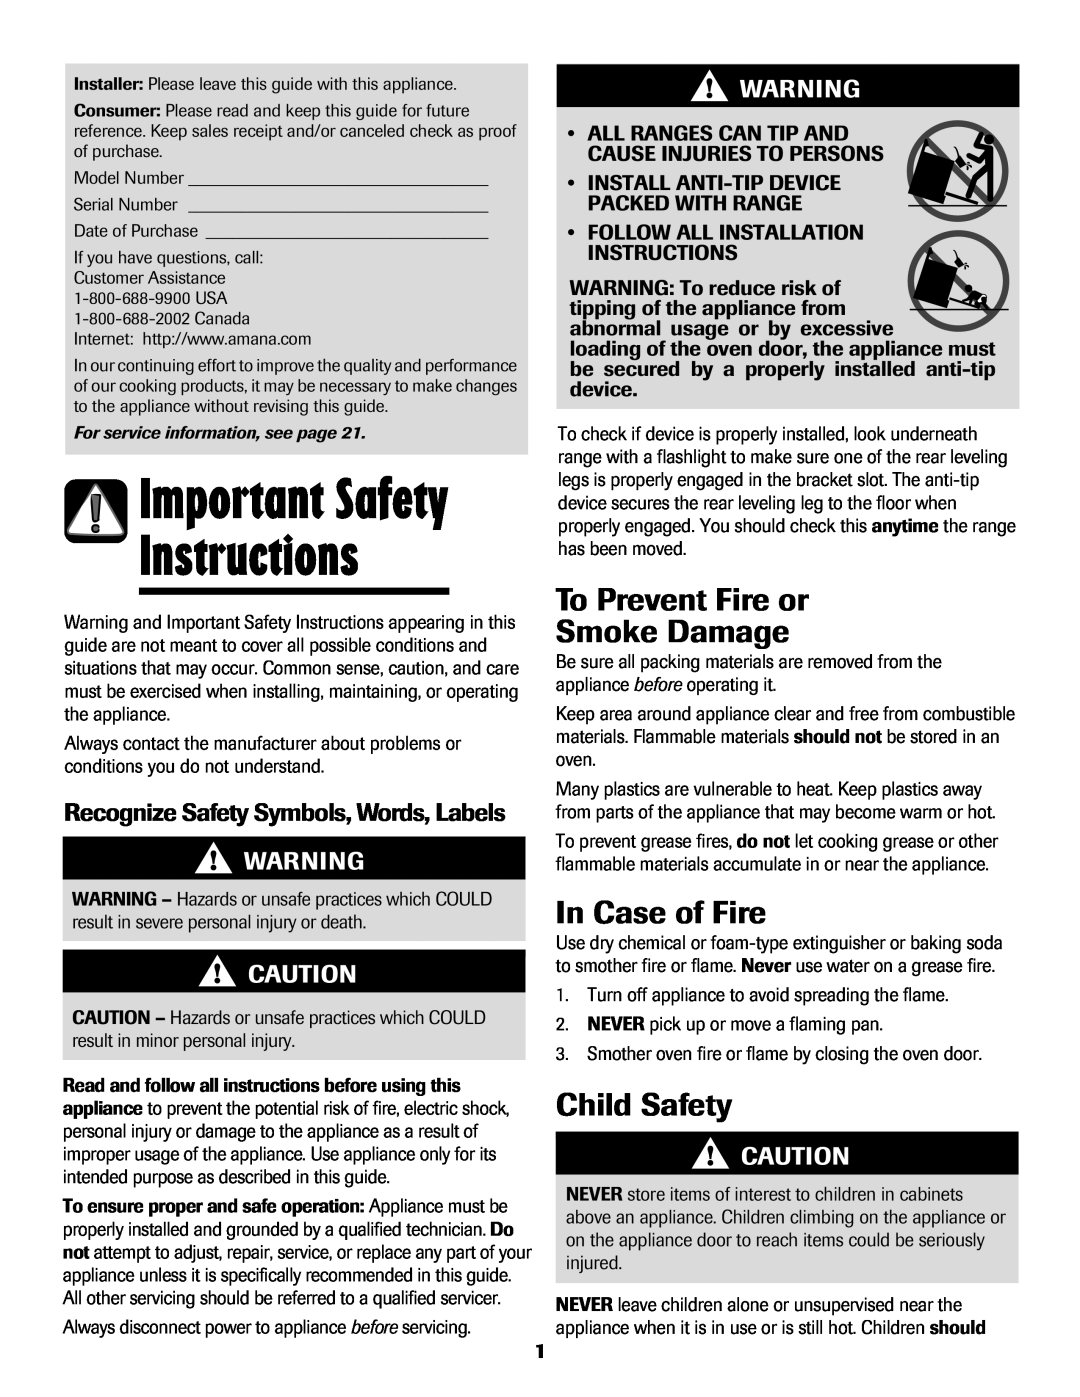 Amana AER5722CAS manual Instructions, Important Safety, To Prevent Fire or Smoke Damage, In Case of Fire, Child Safety 